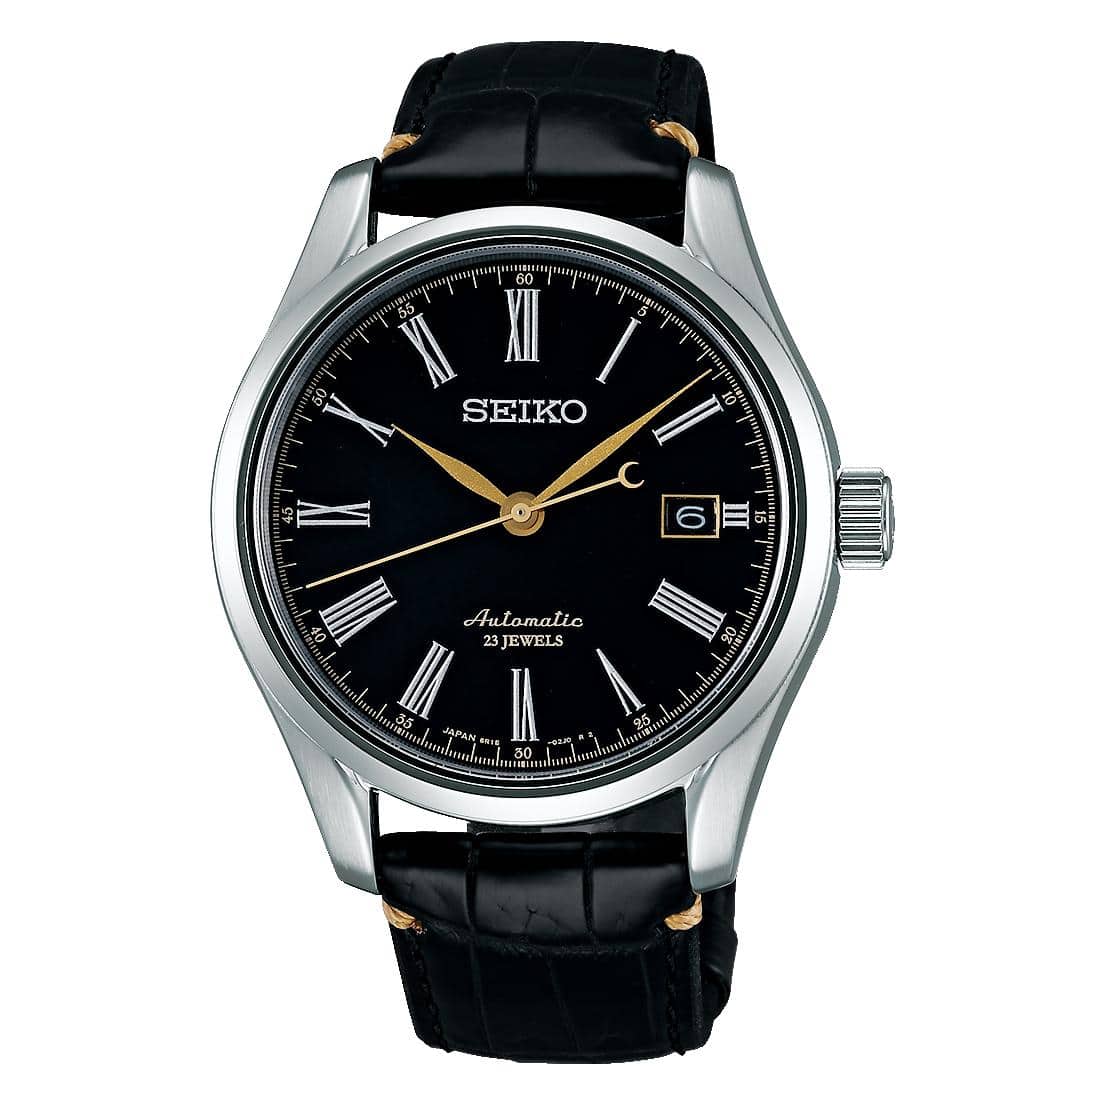 New]Seiko PRESAGE Mechanical Automatic Watch Lacquered Dial SARX029 - BE  FORWARD Store